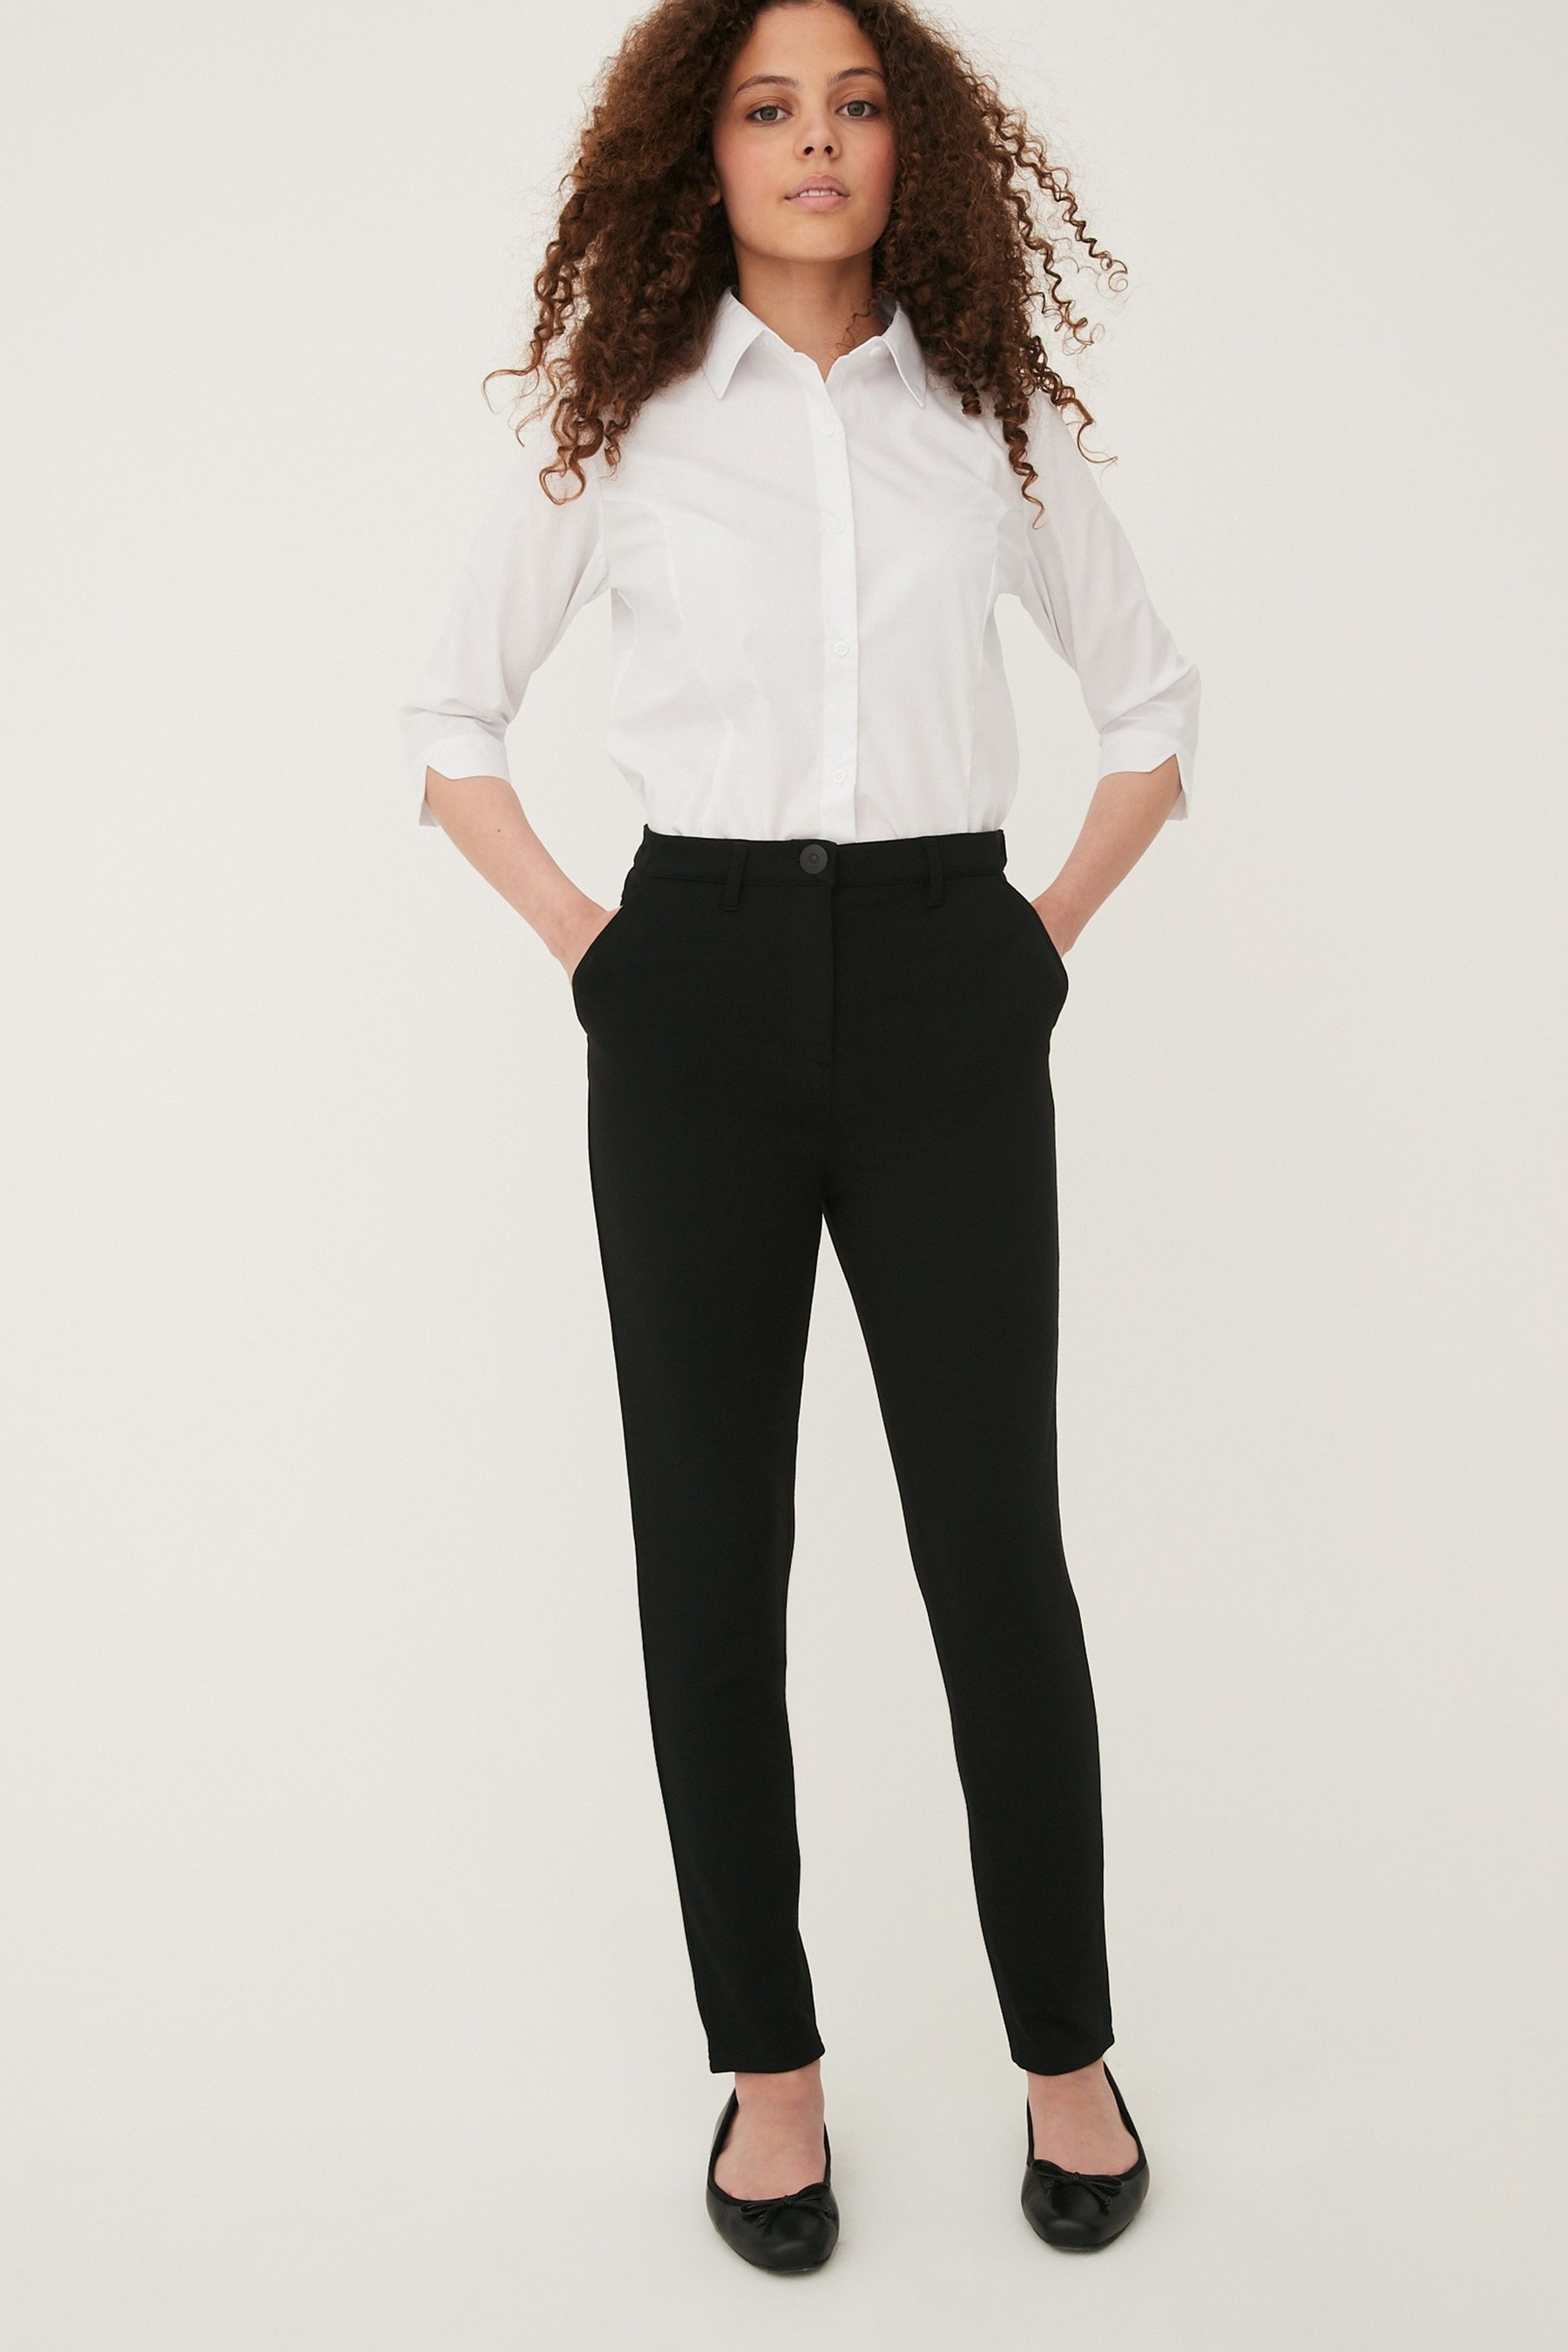 Buy Black Shapewear Boot Cut Trousers from the Next UK online shop